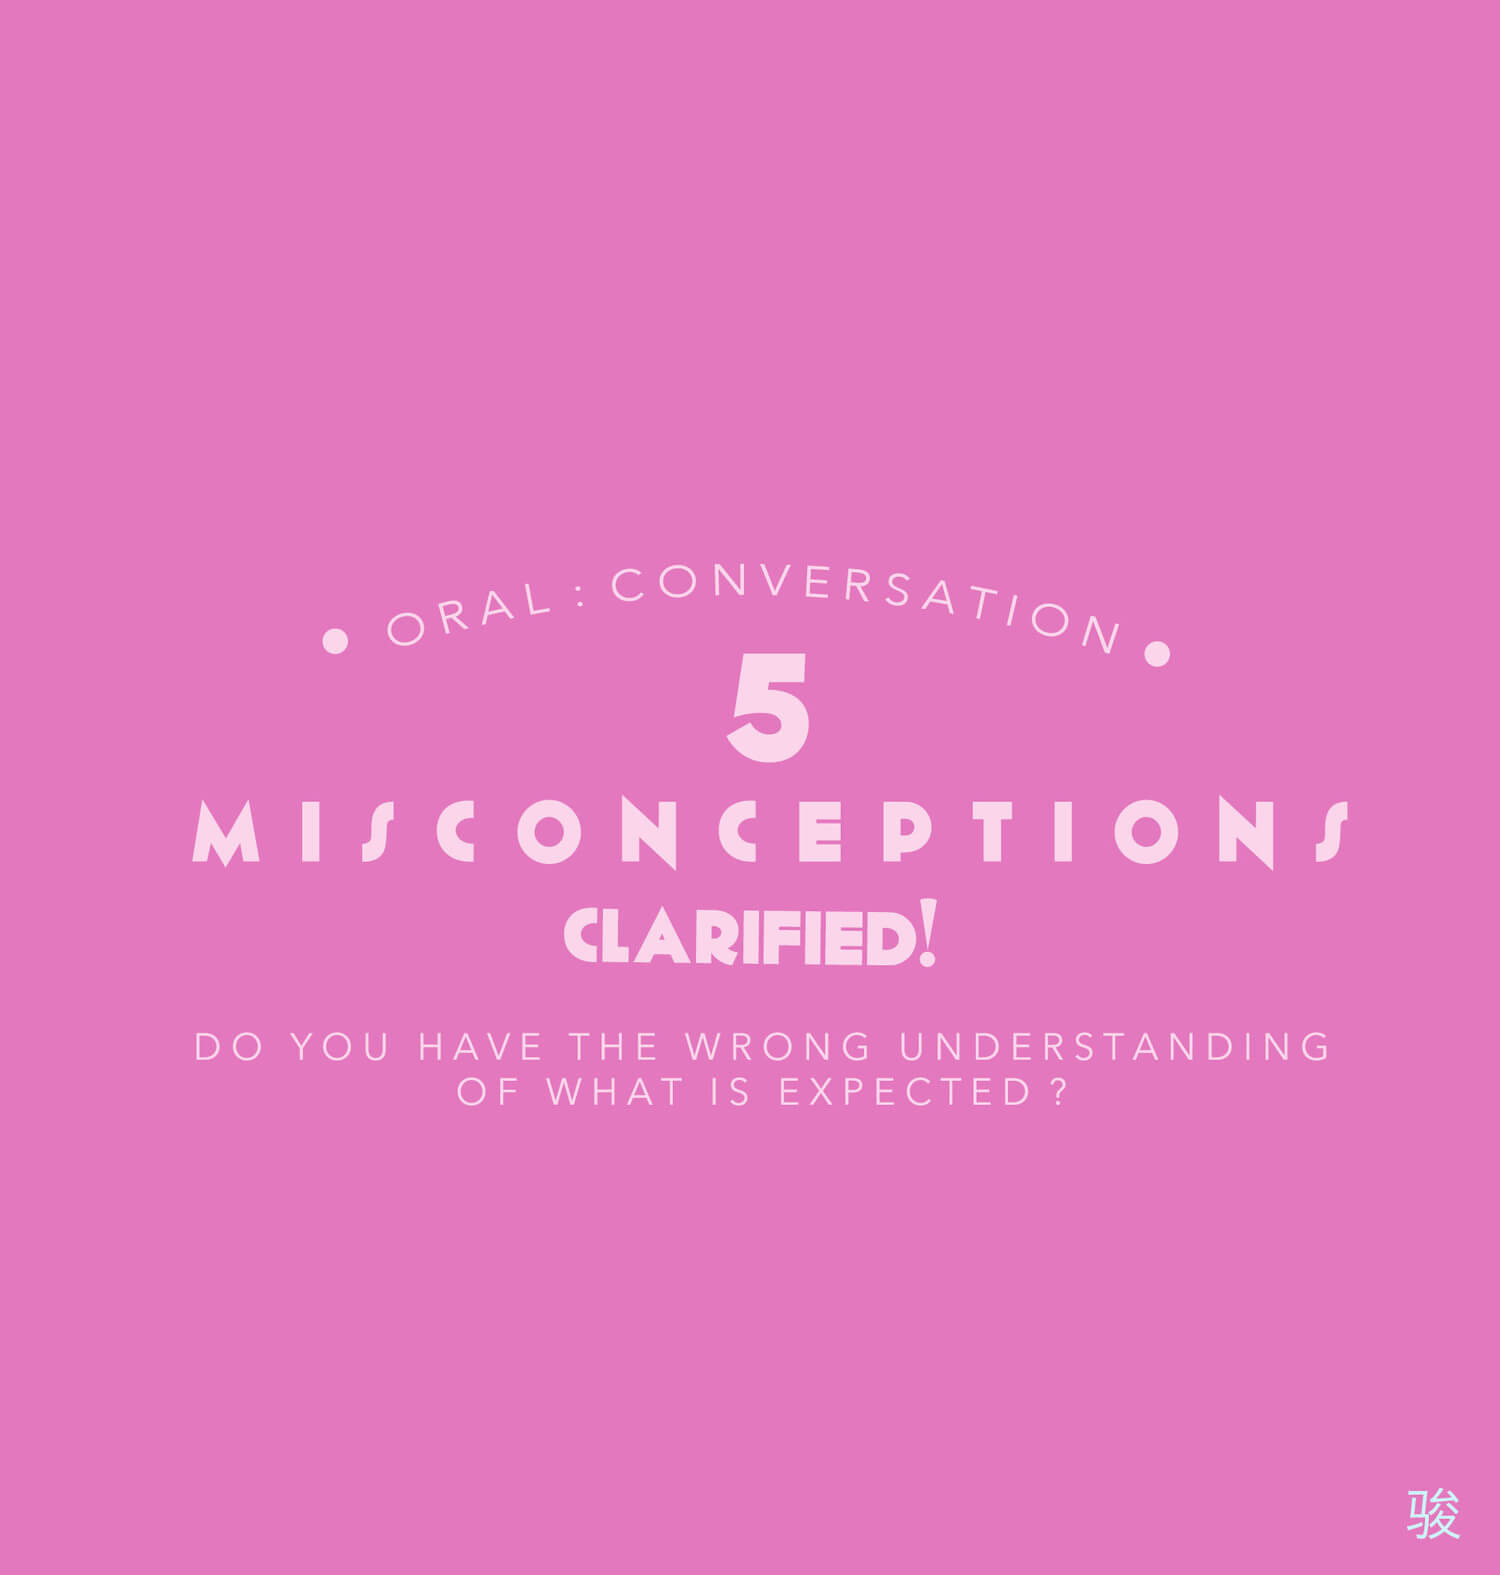 Misconceptions During Stimulus-Based Conversation